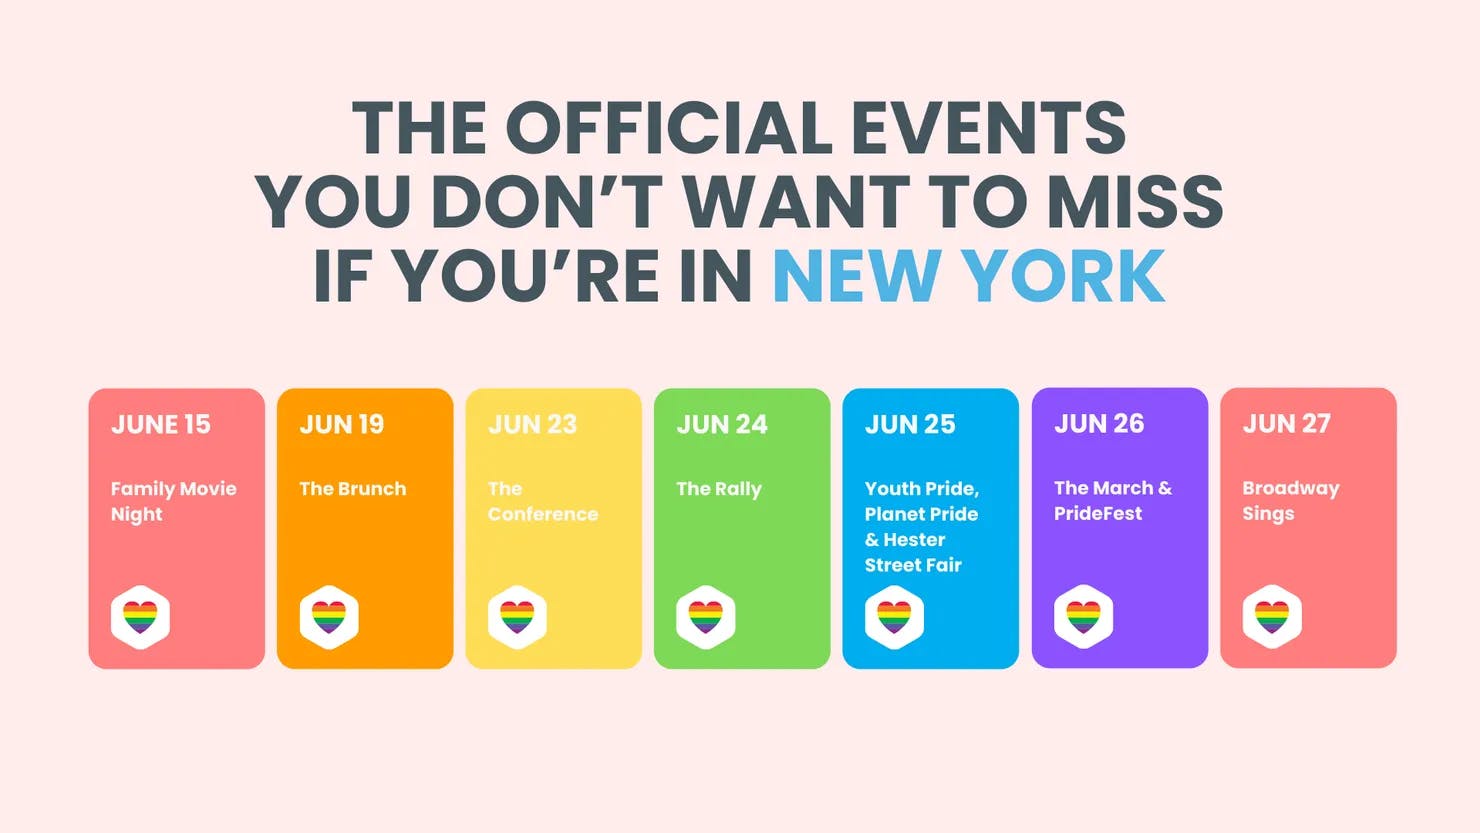 The Pride event timeline in New York